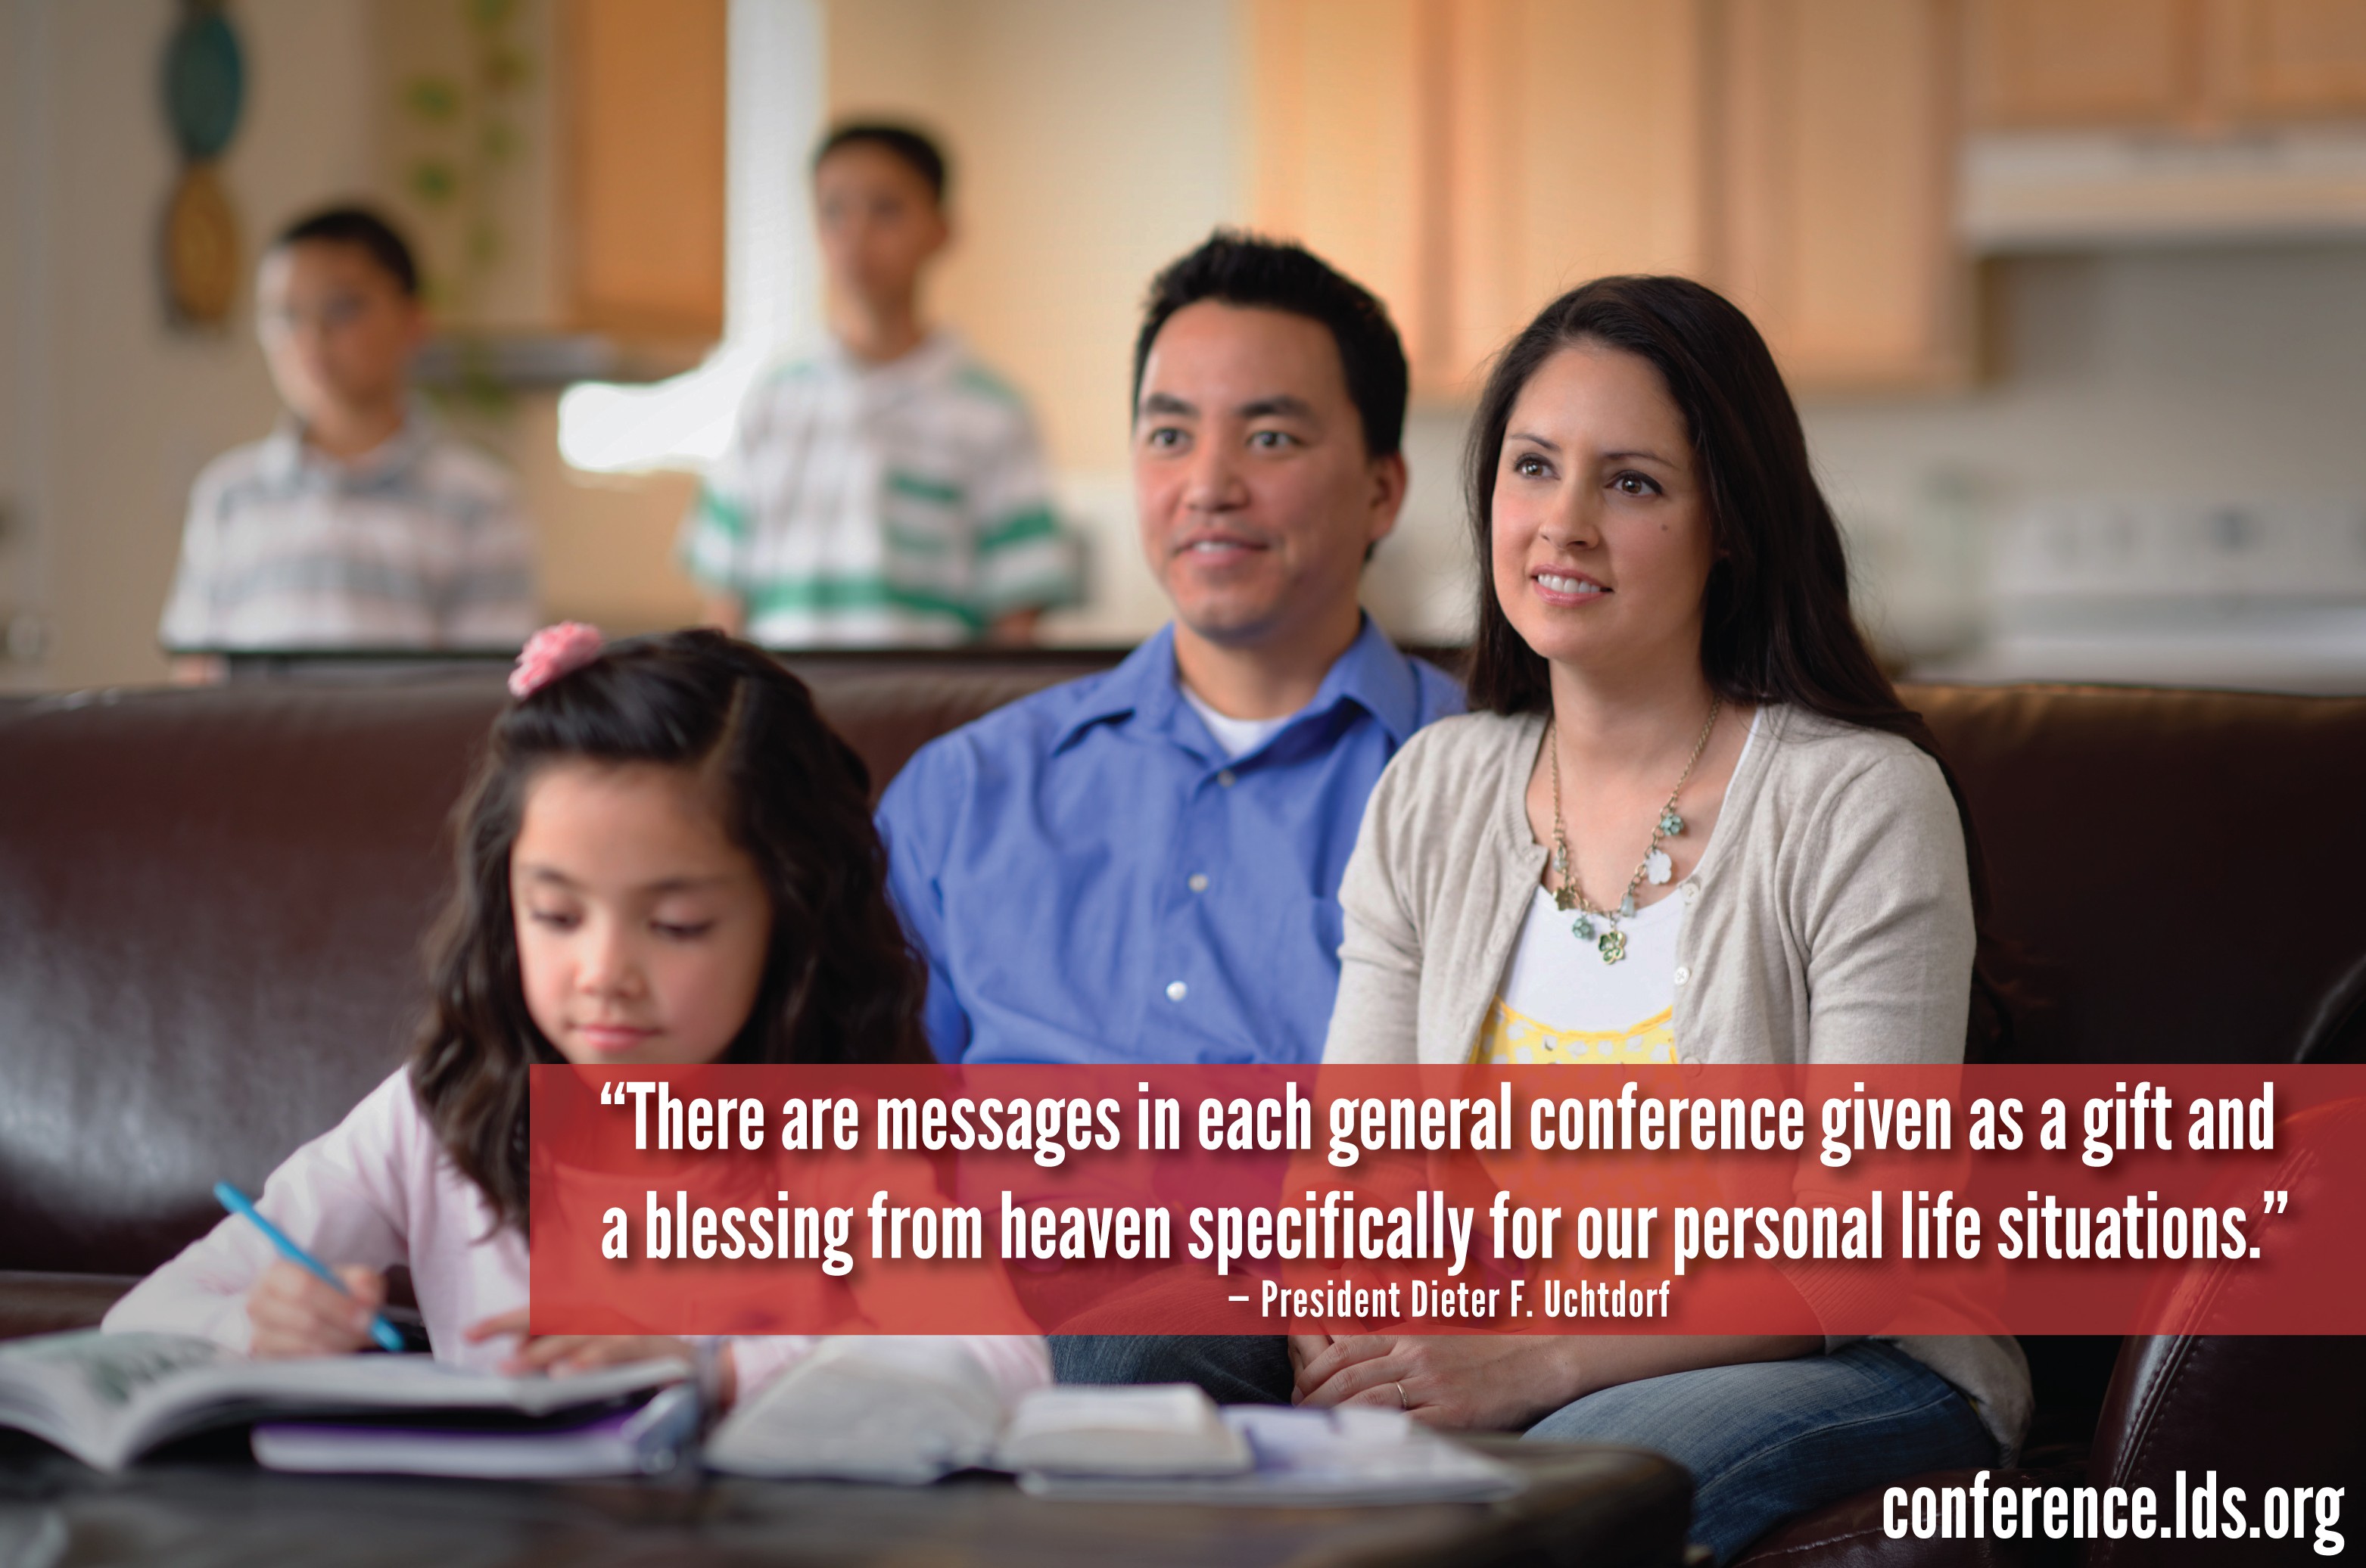 An image of a family watching conference and a quote by President Dieter F. Uchtdorf: “There are messages in each general conference … for our personal life situations.”